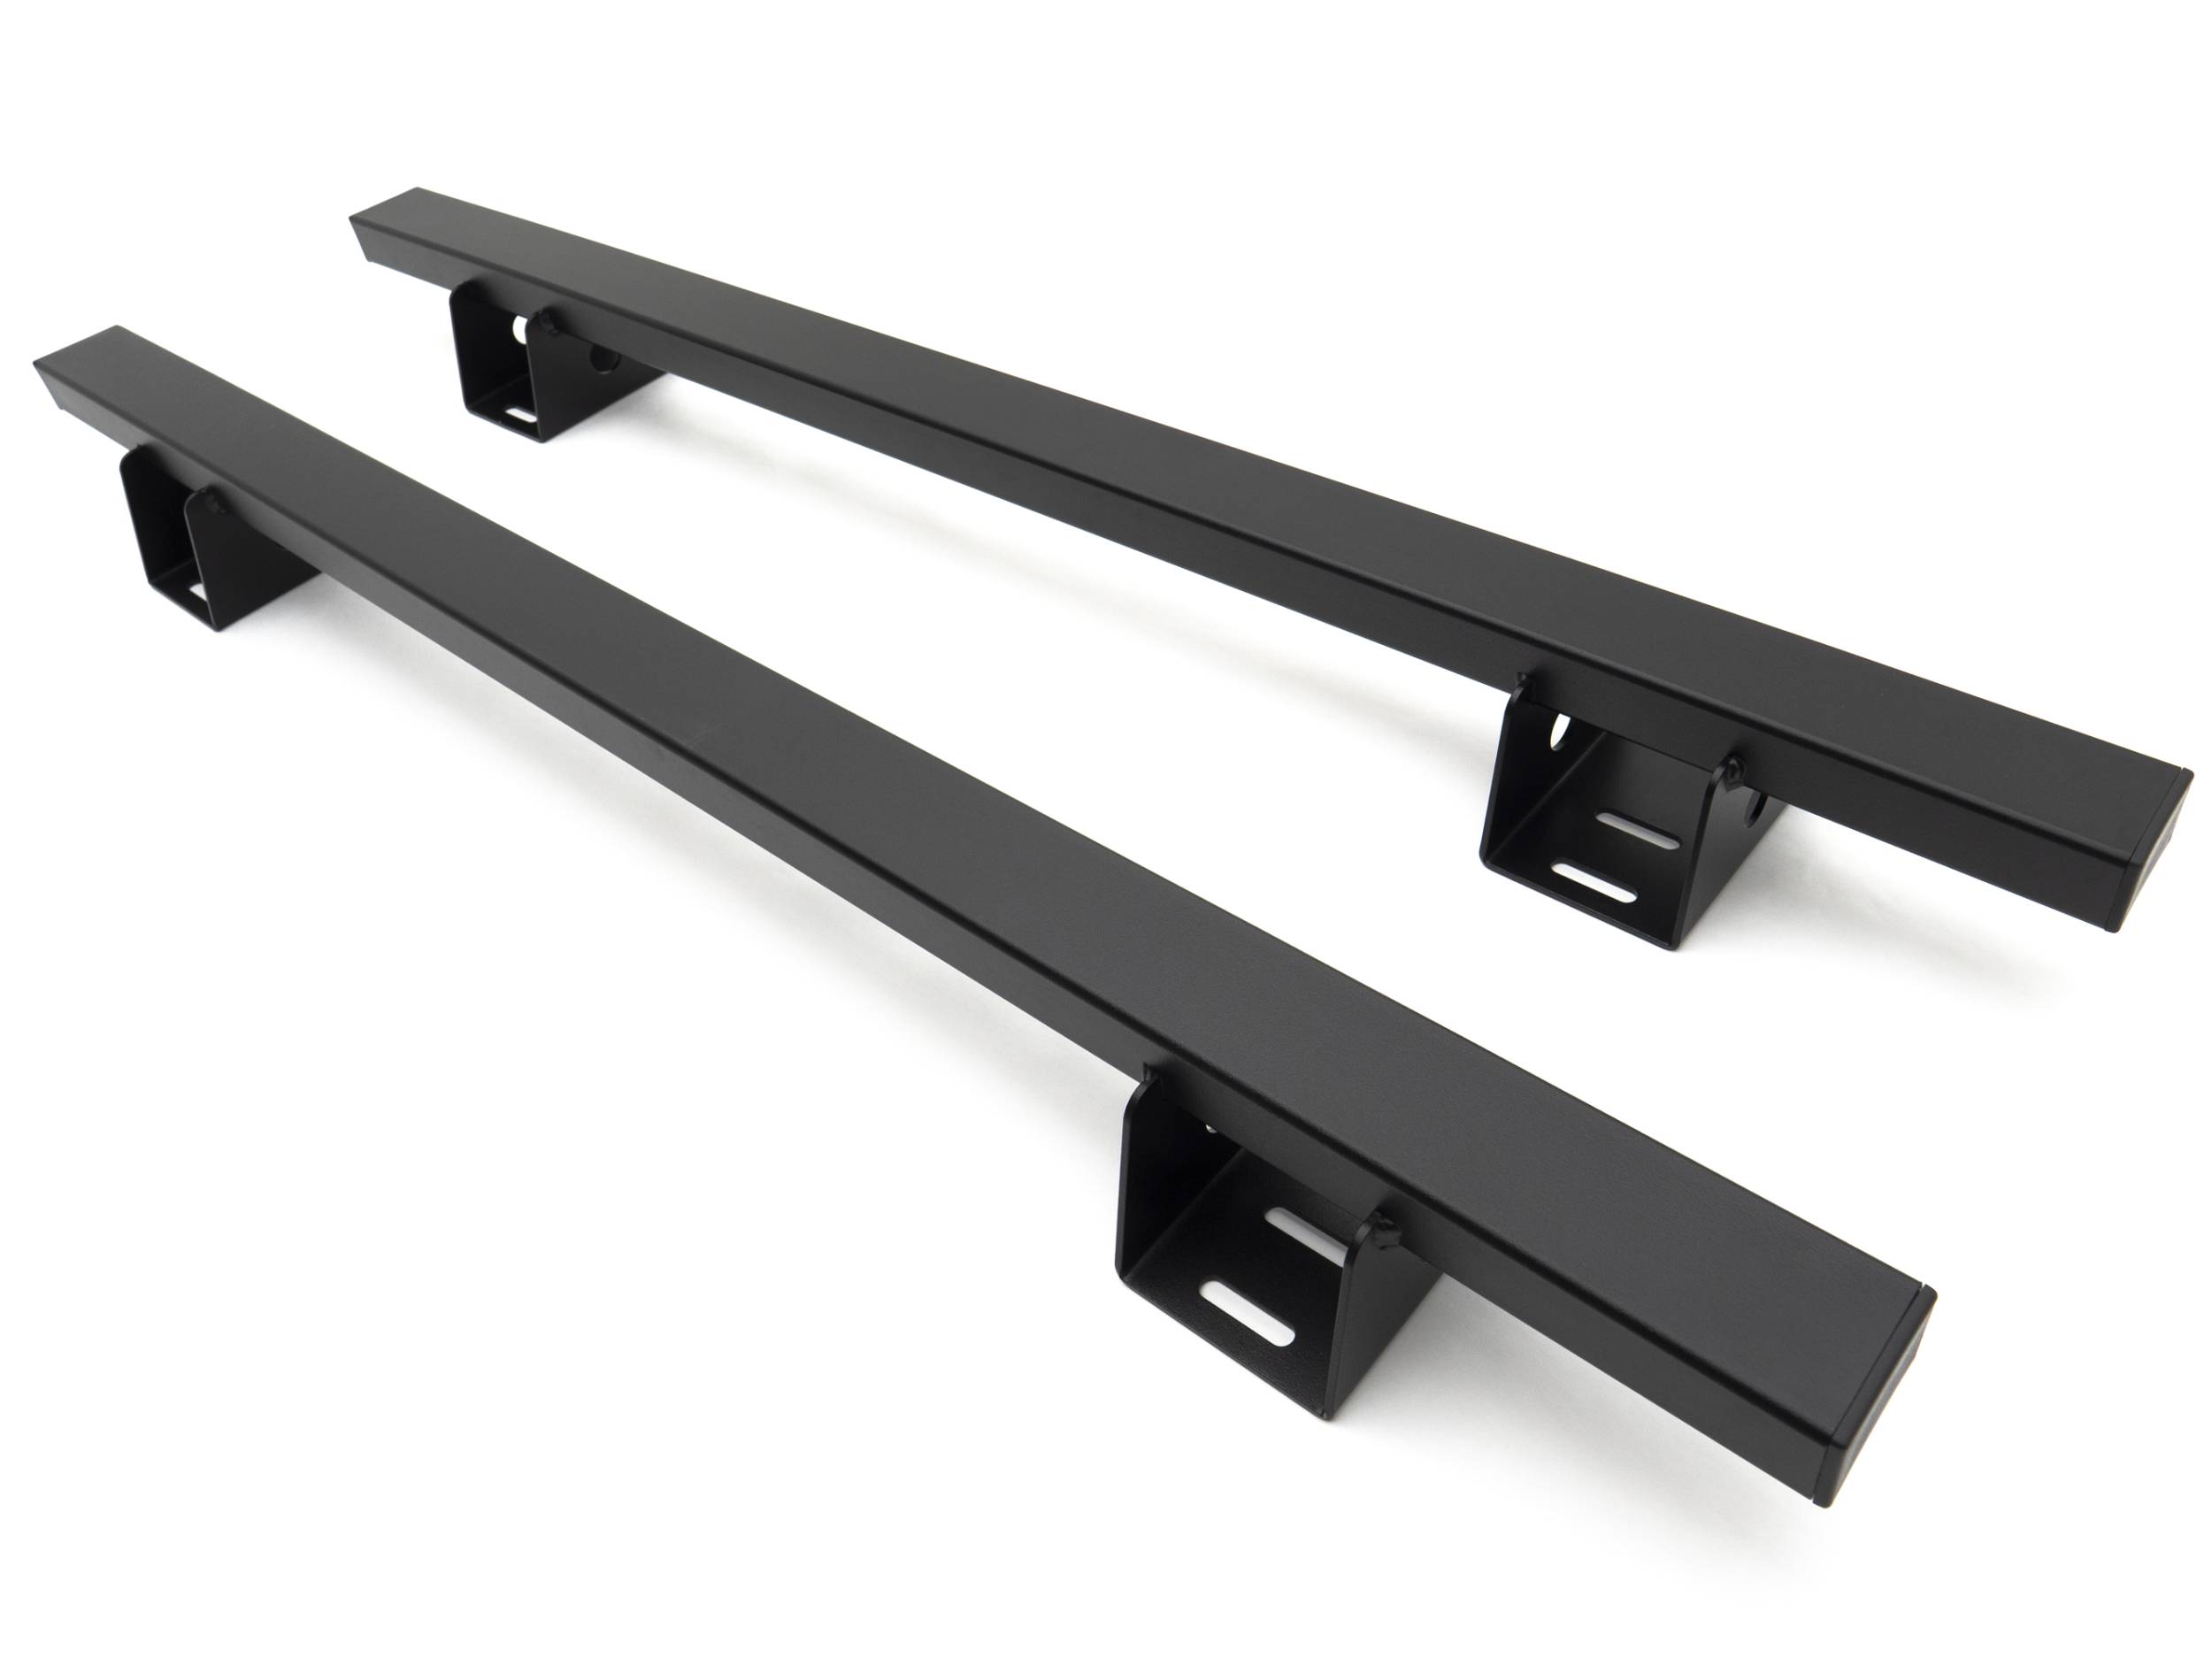 ZROADZ OFF ROAD PRODUCTS - 2019-2022 Jeep Gladiator Access Overland Rack Crossbars, Black, Mild Steel, Bolt-On, 2 Pc Set with Hardware - Part # Z834011